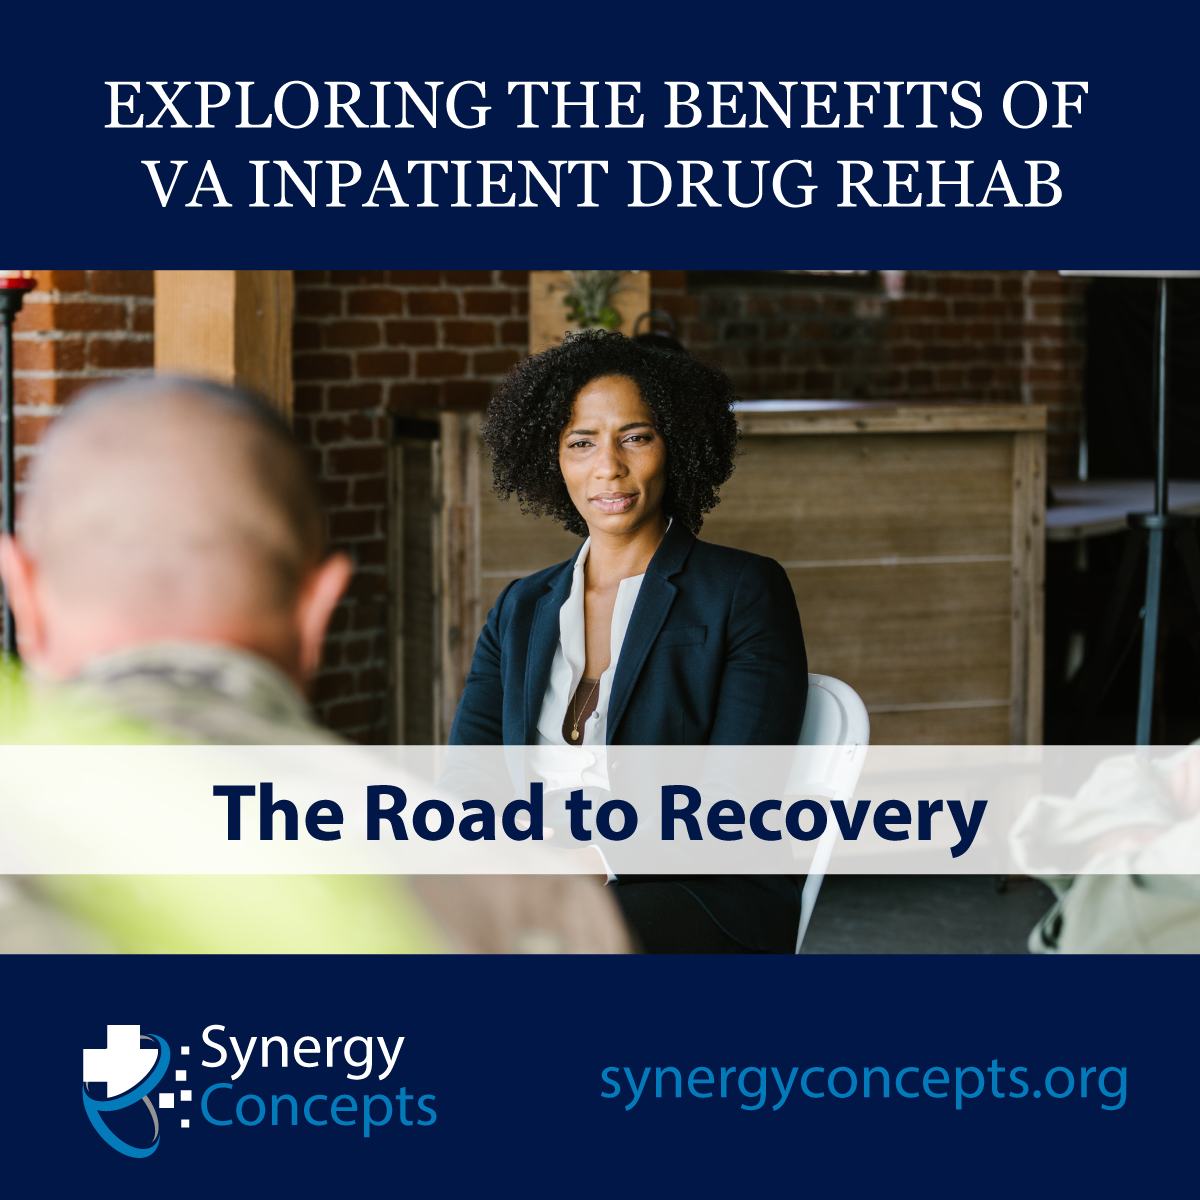 VA Inpatient Rehab: Exploring the Benefits of the Road to Recovery - Synergy Concepts behavioral health medical billing and coding